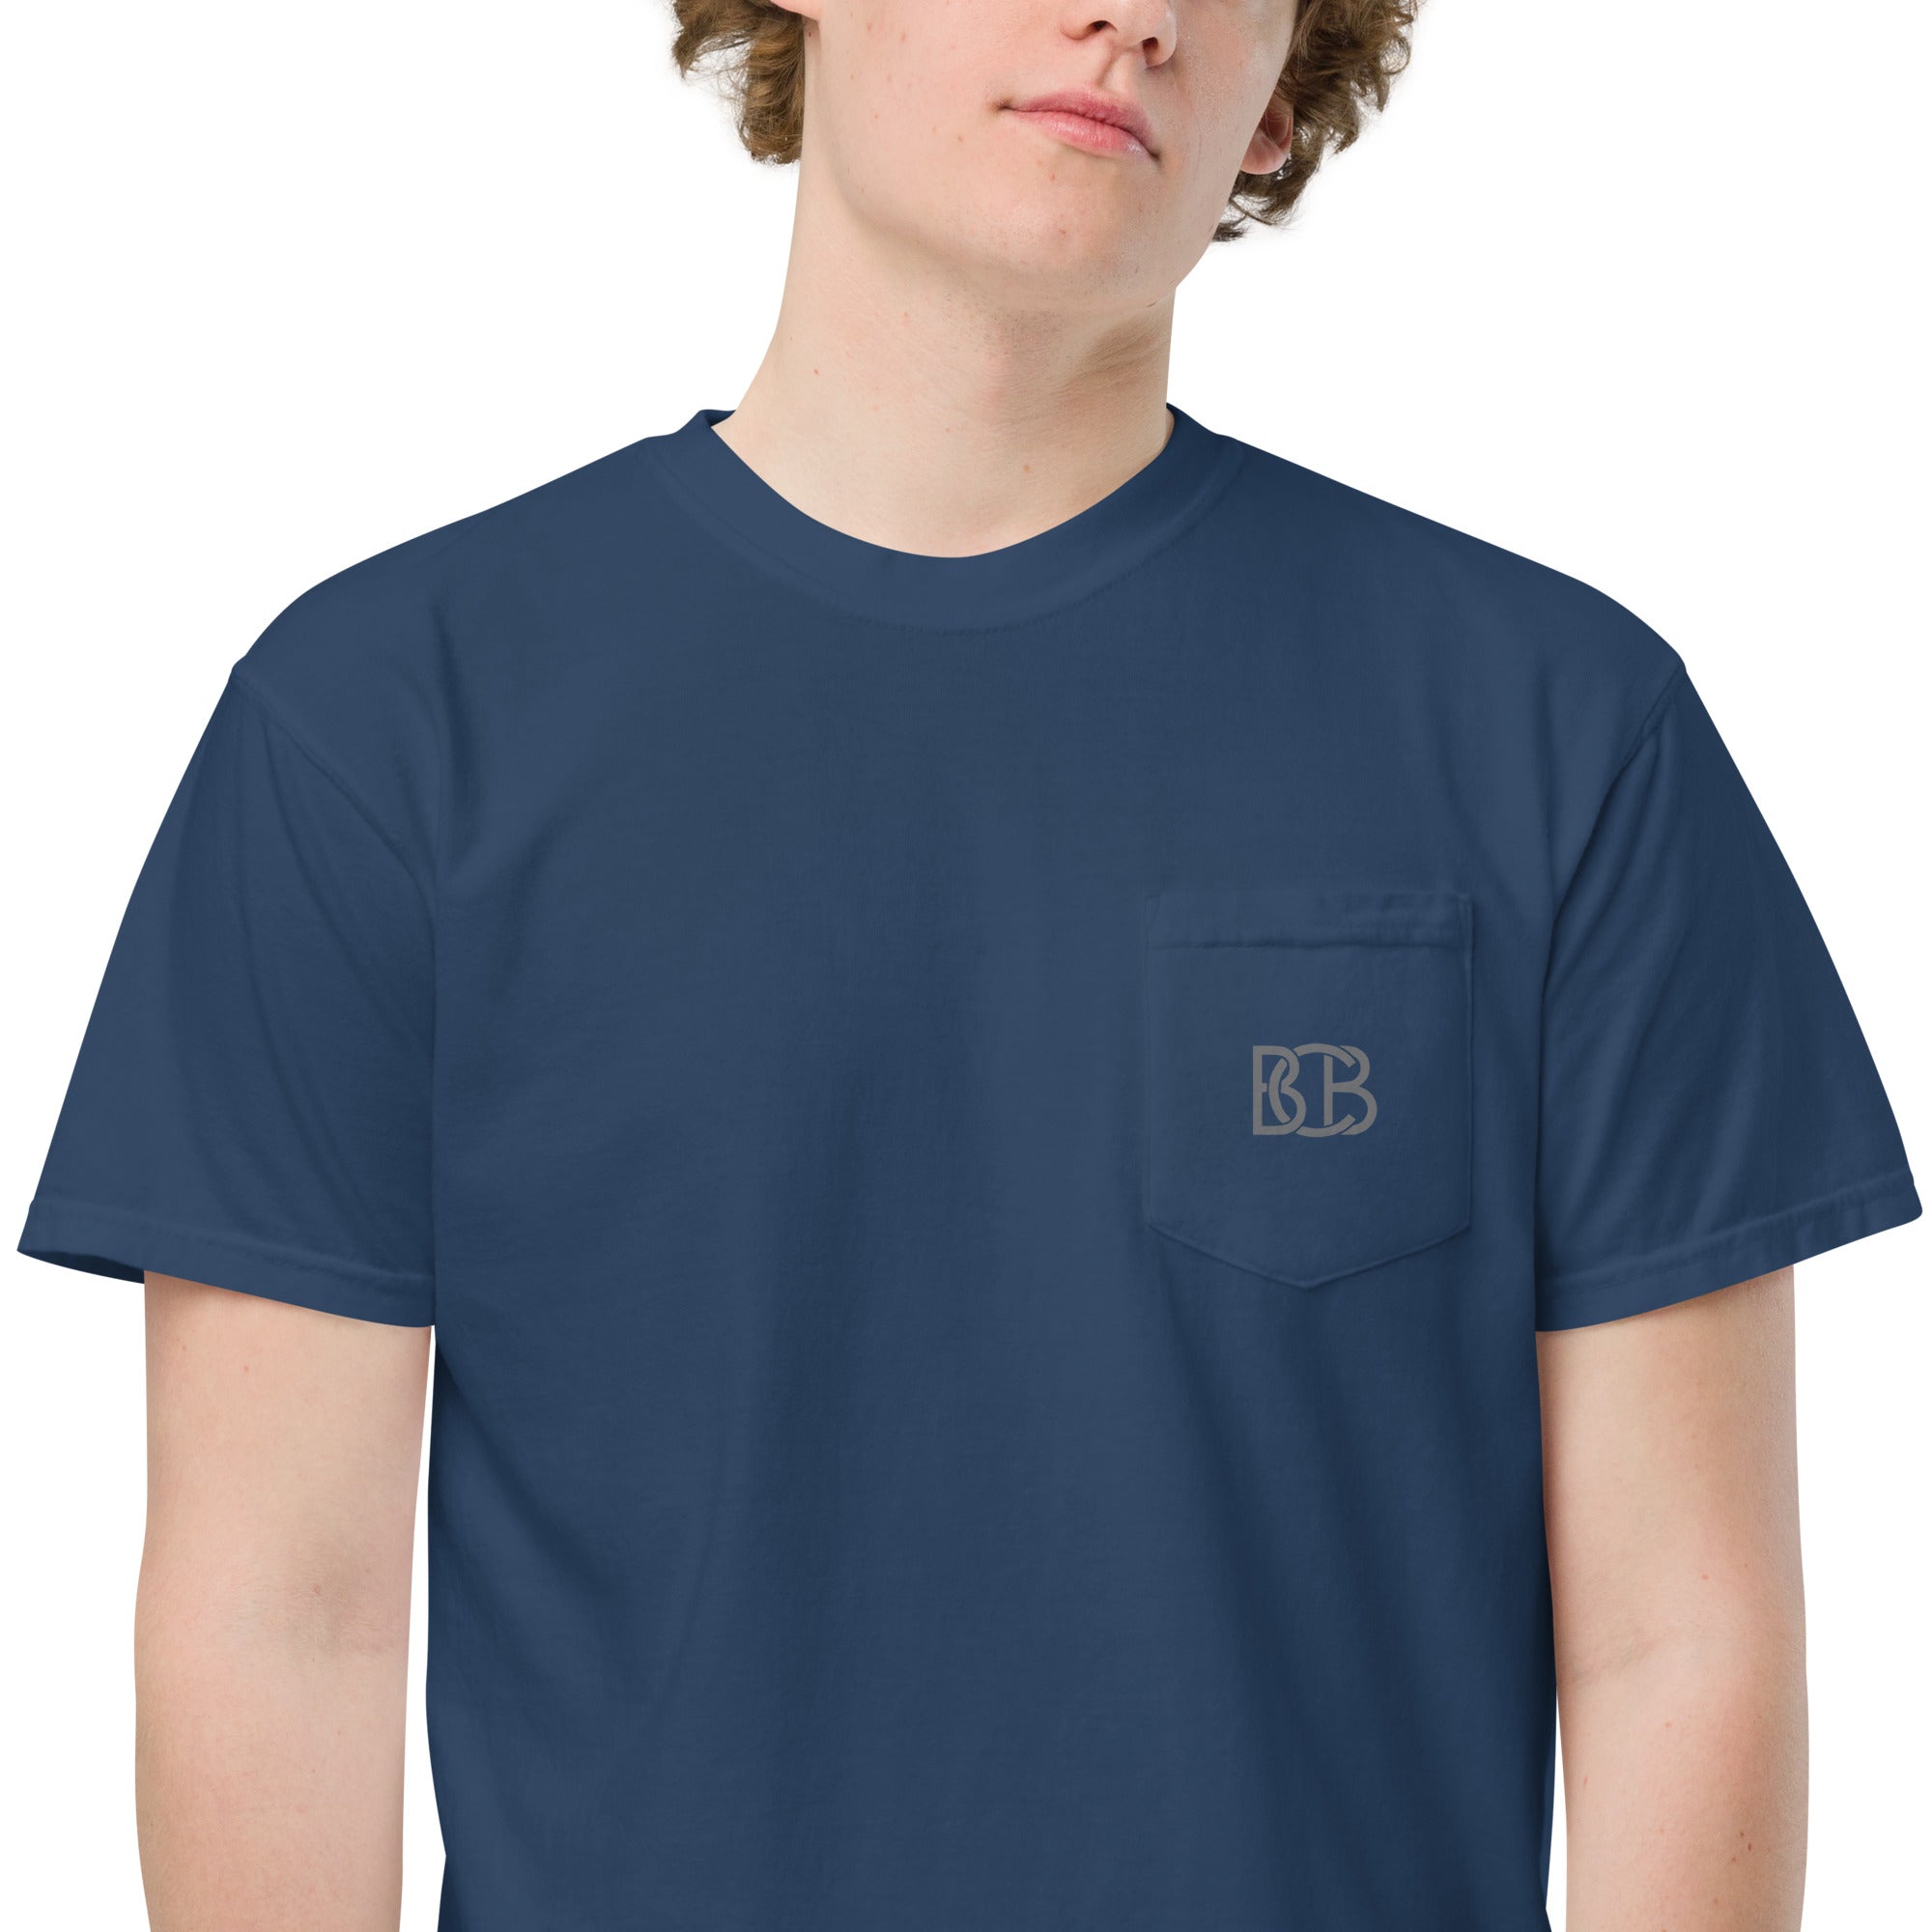 No Suits and Ties and All Their Lies I BCB Premium Pocket T-shirts